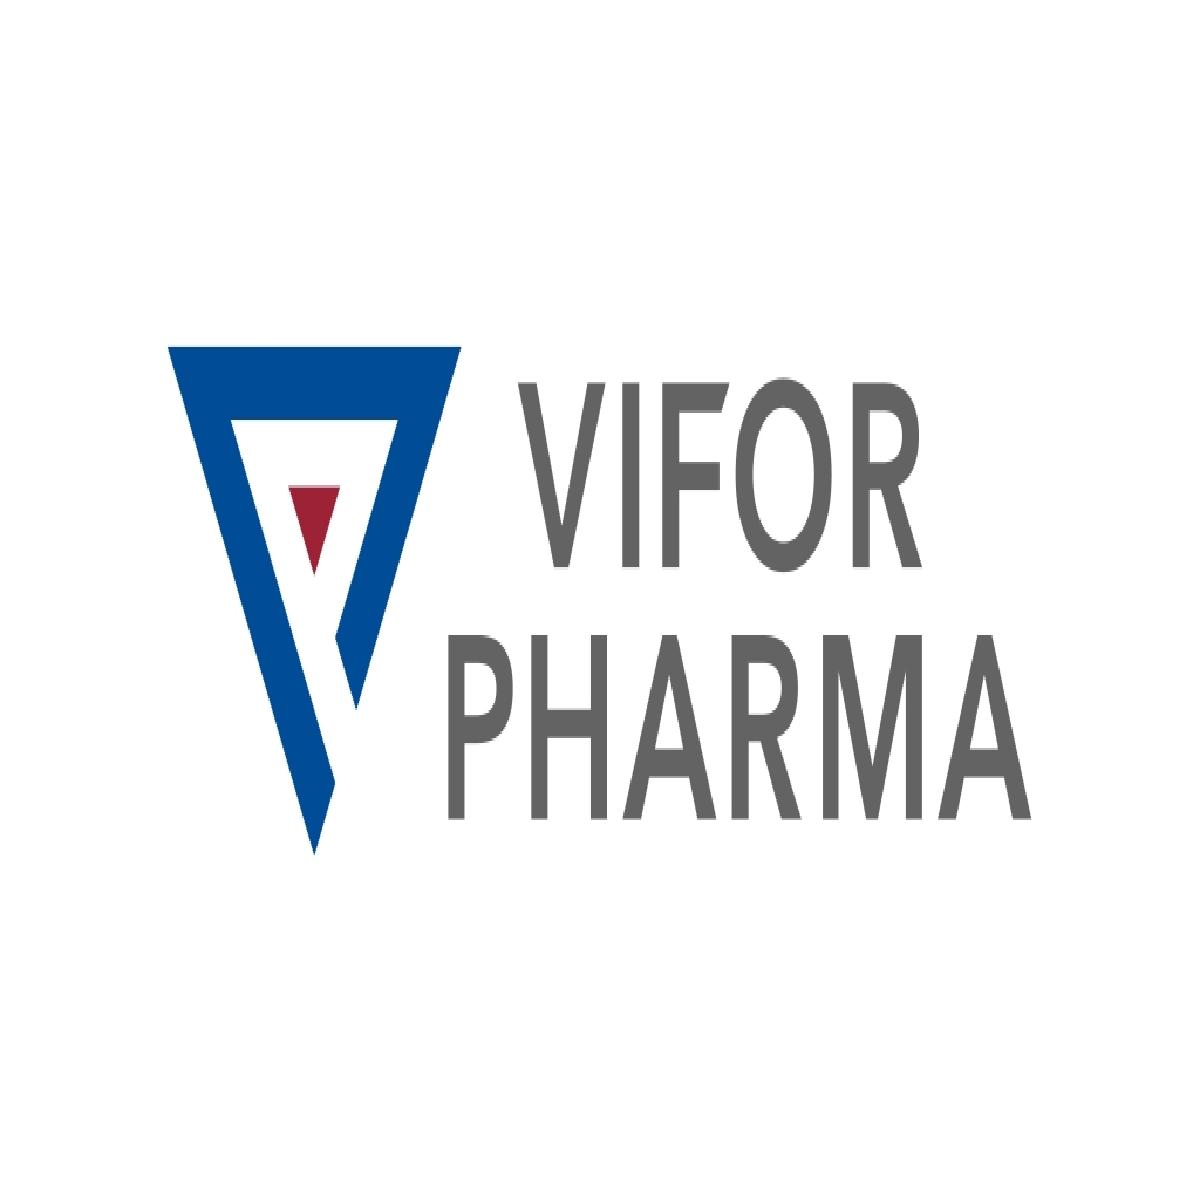 Finalization of Vifor Pharma acquisition